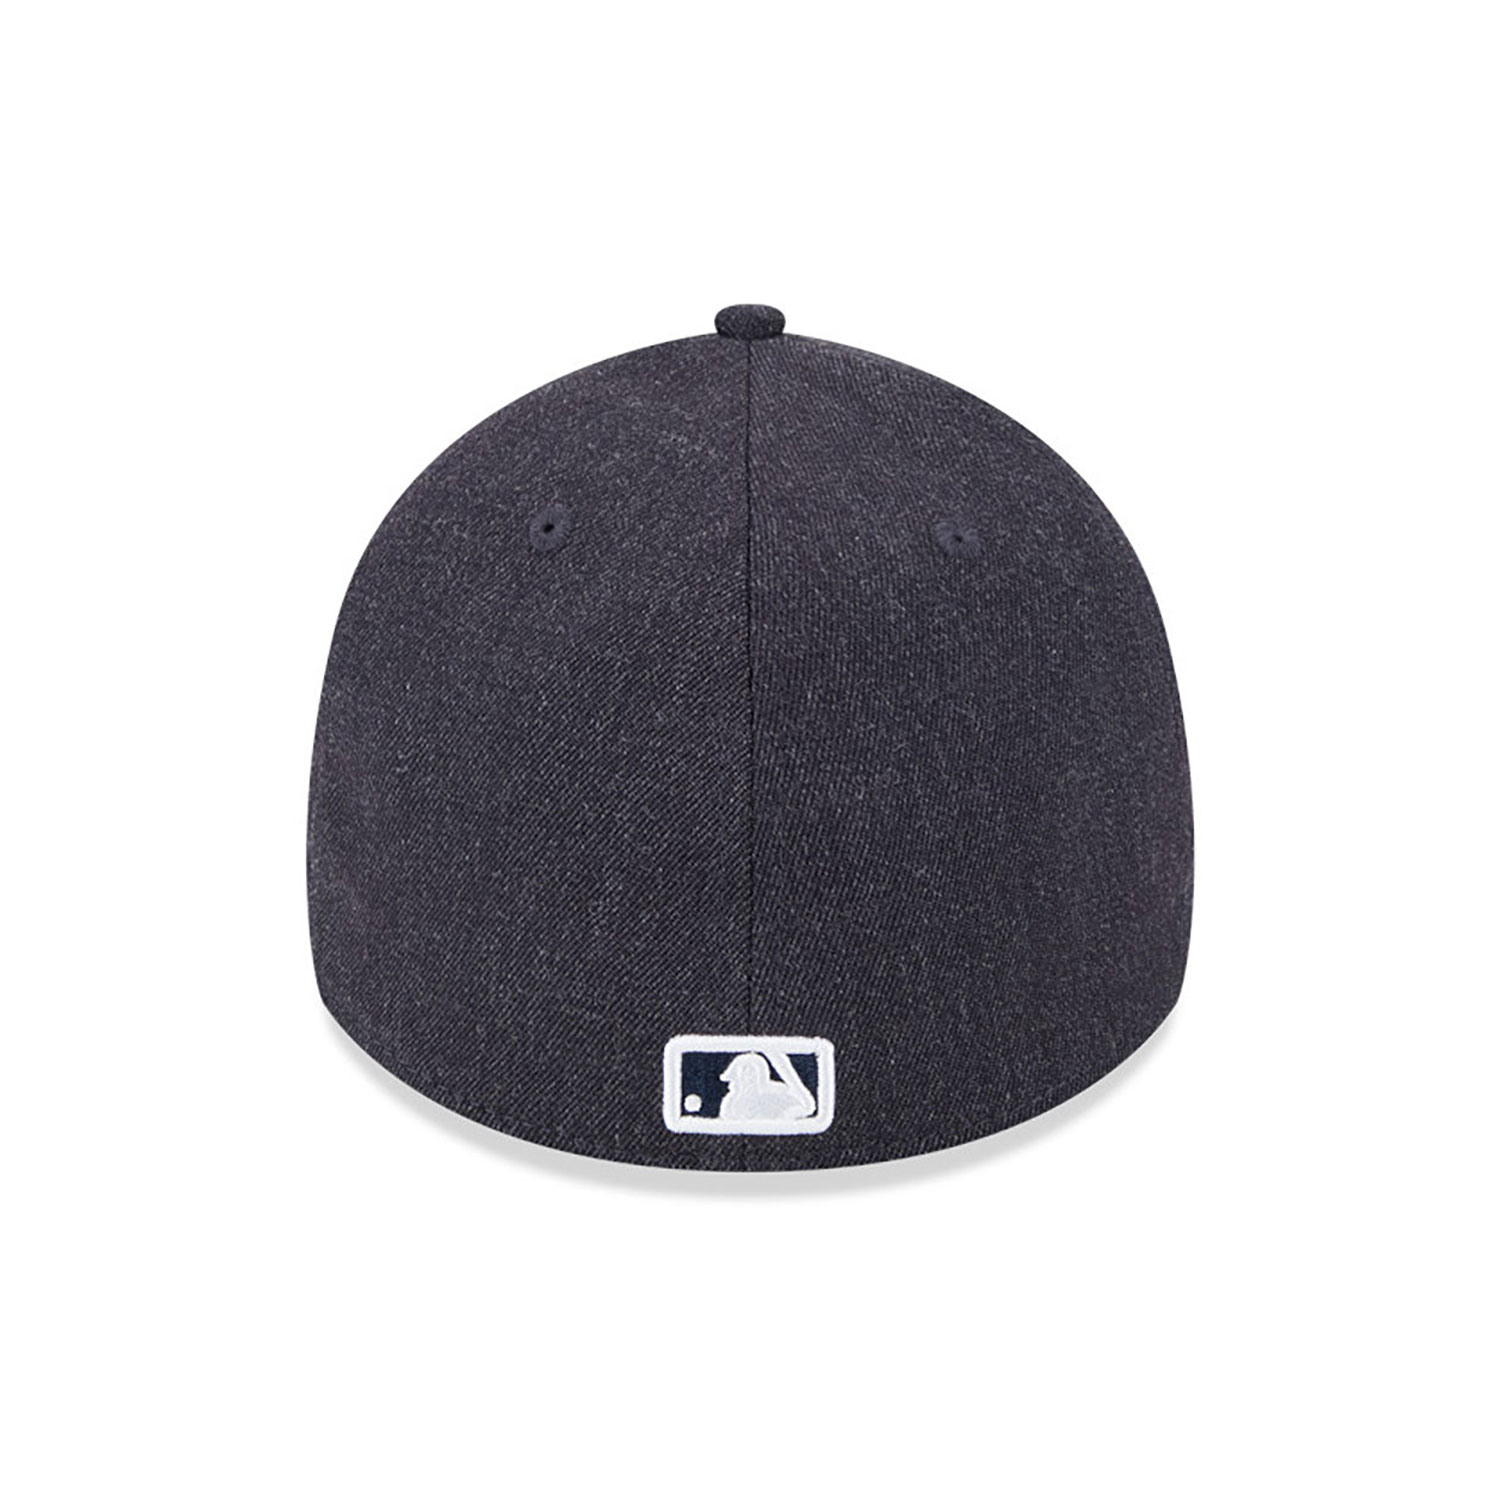 New York Yankees Heather Wool Navy 39THIRTY Stretch Fit Cap